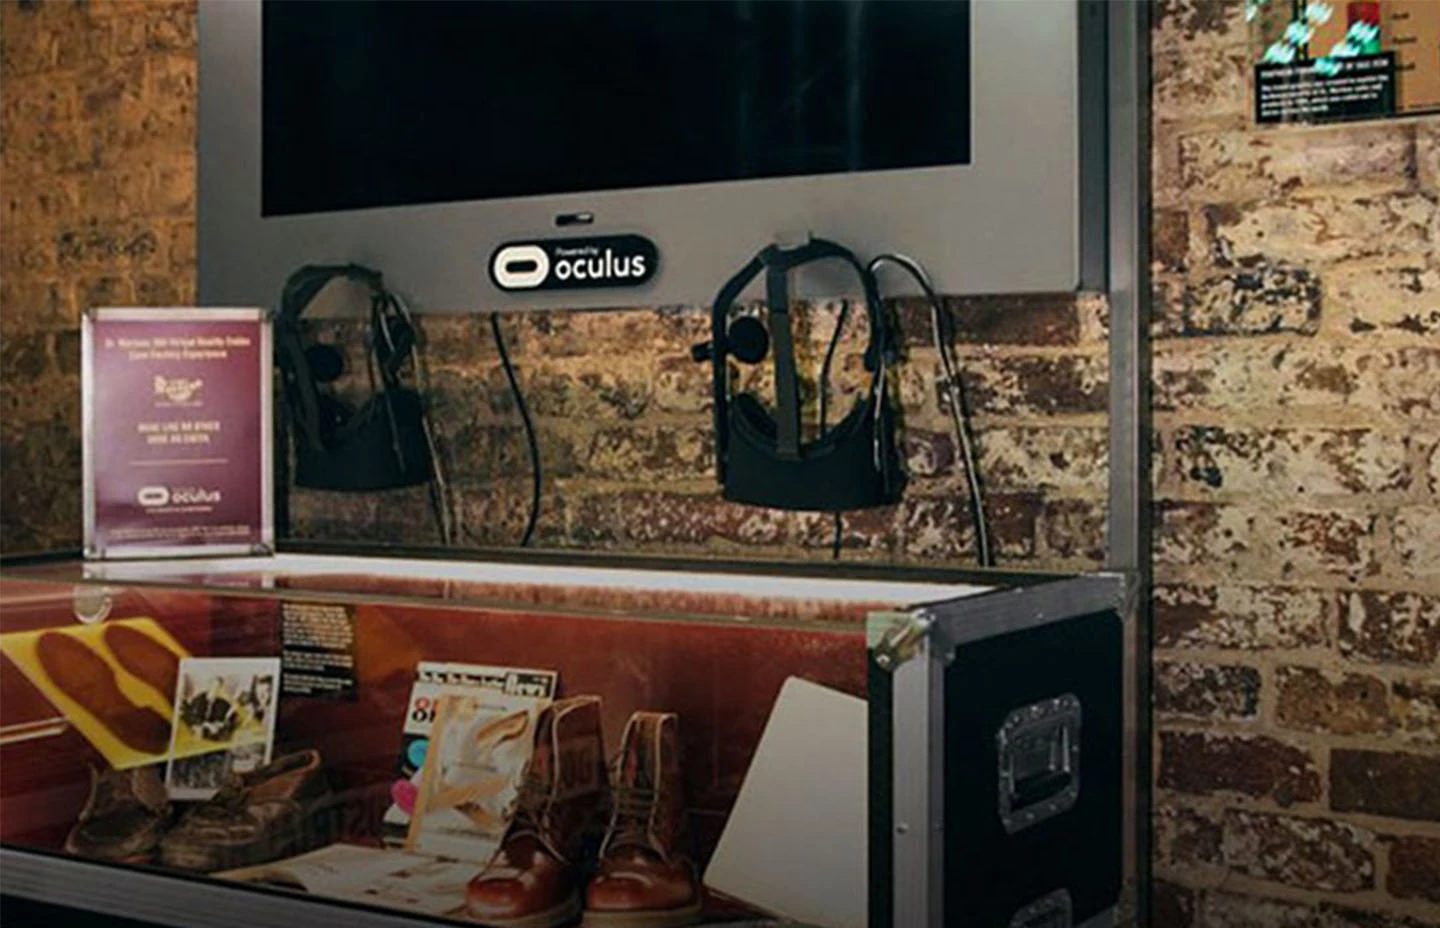 Oculus television and headsets hanging above a shelf of Dr Martens memorabilia